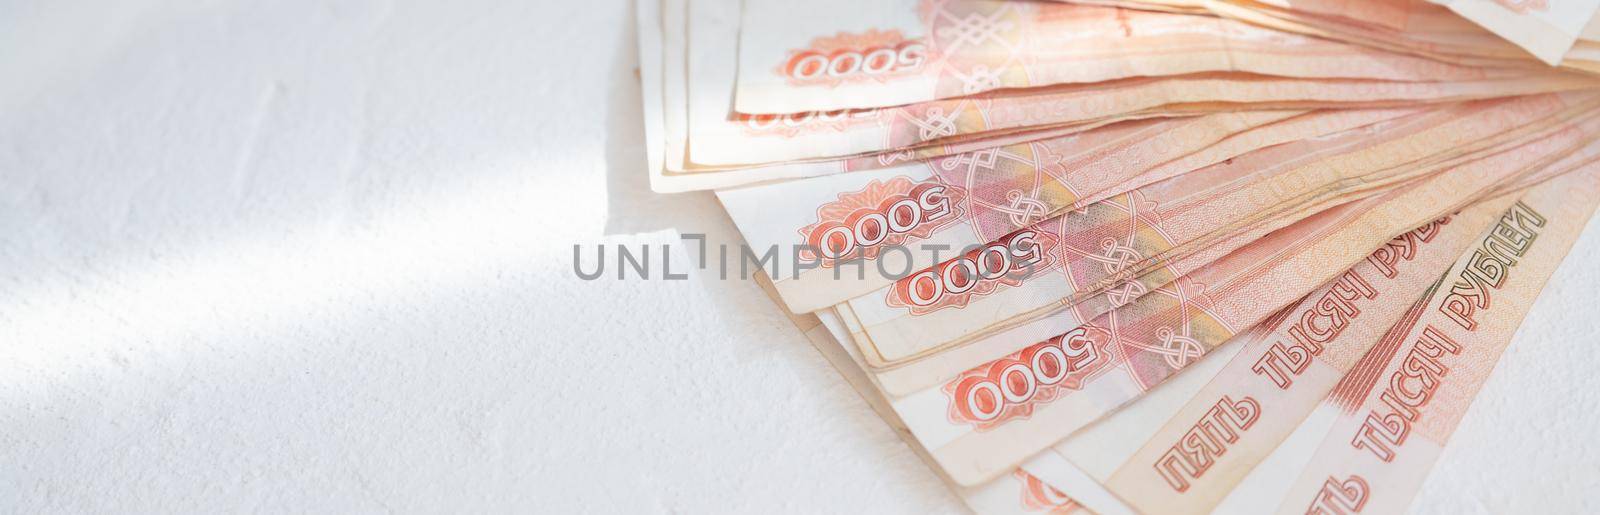 Russian ruble banknotes issued by the Bank of Russia. Financial system and economy of Russia. World monetary system.